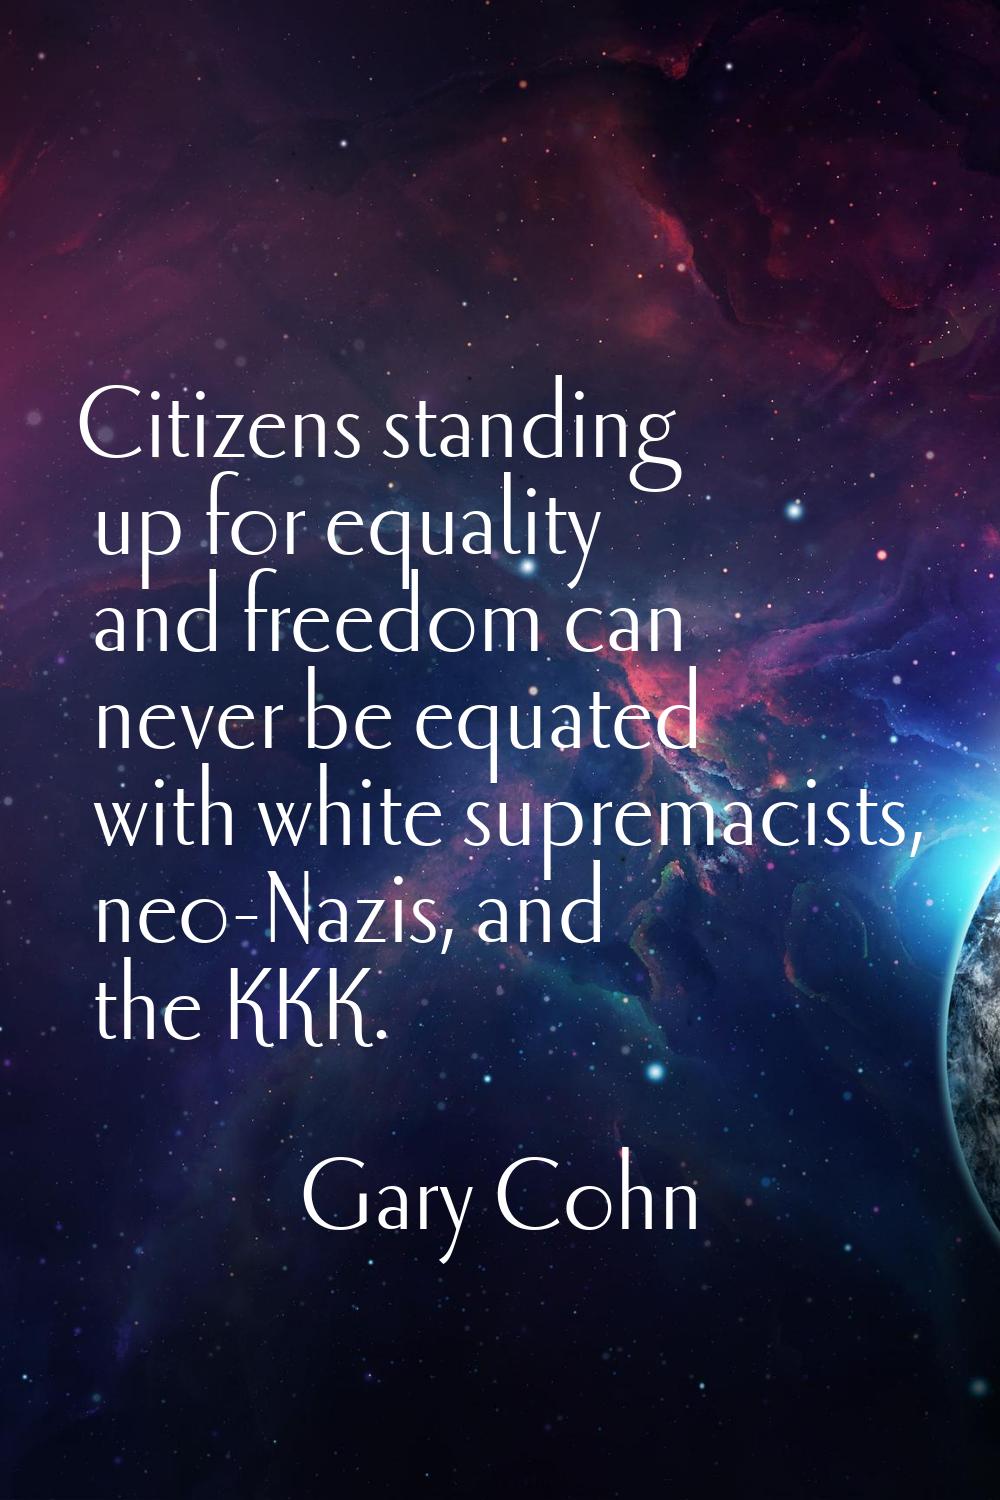 Citizens standing up for equality and freedom can never be equated with white supremacists, neo-Naz